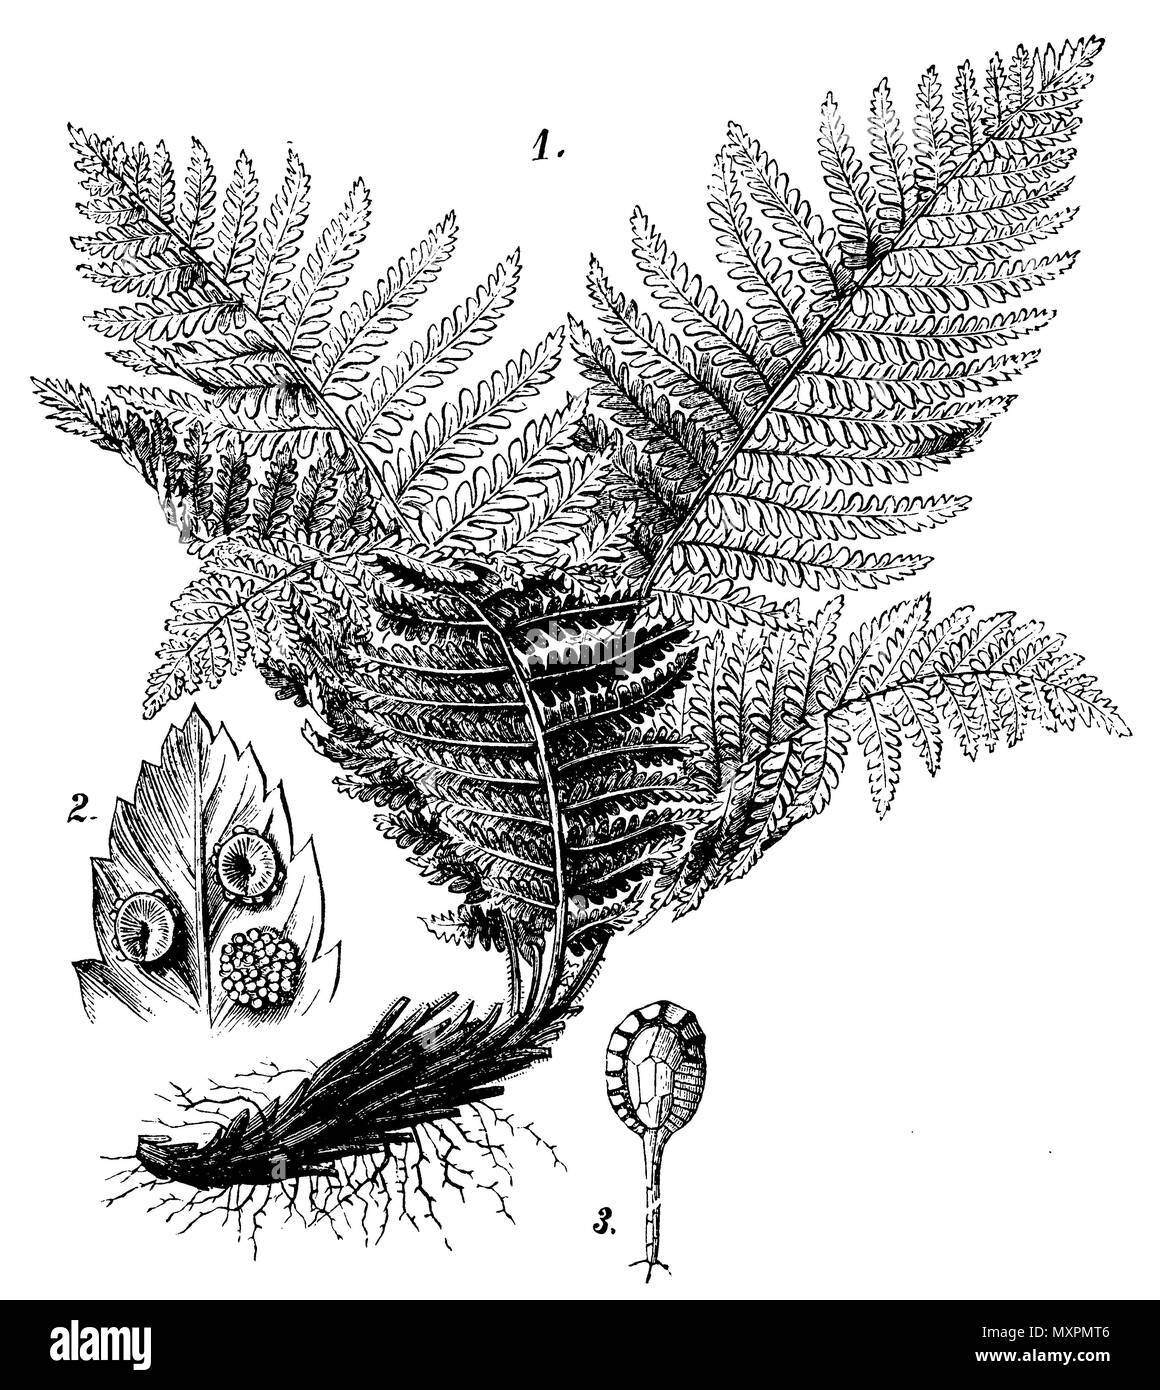 Male fern <Dryopteris filix-mas> 1 whole plant, 2 one leaf lobe from the underside with three sporangia clusters, one without veil, 3 a sporangium,   1898 Stock Photo